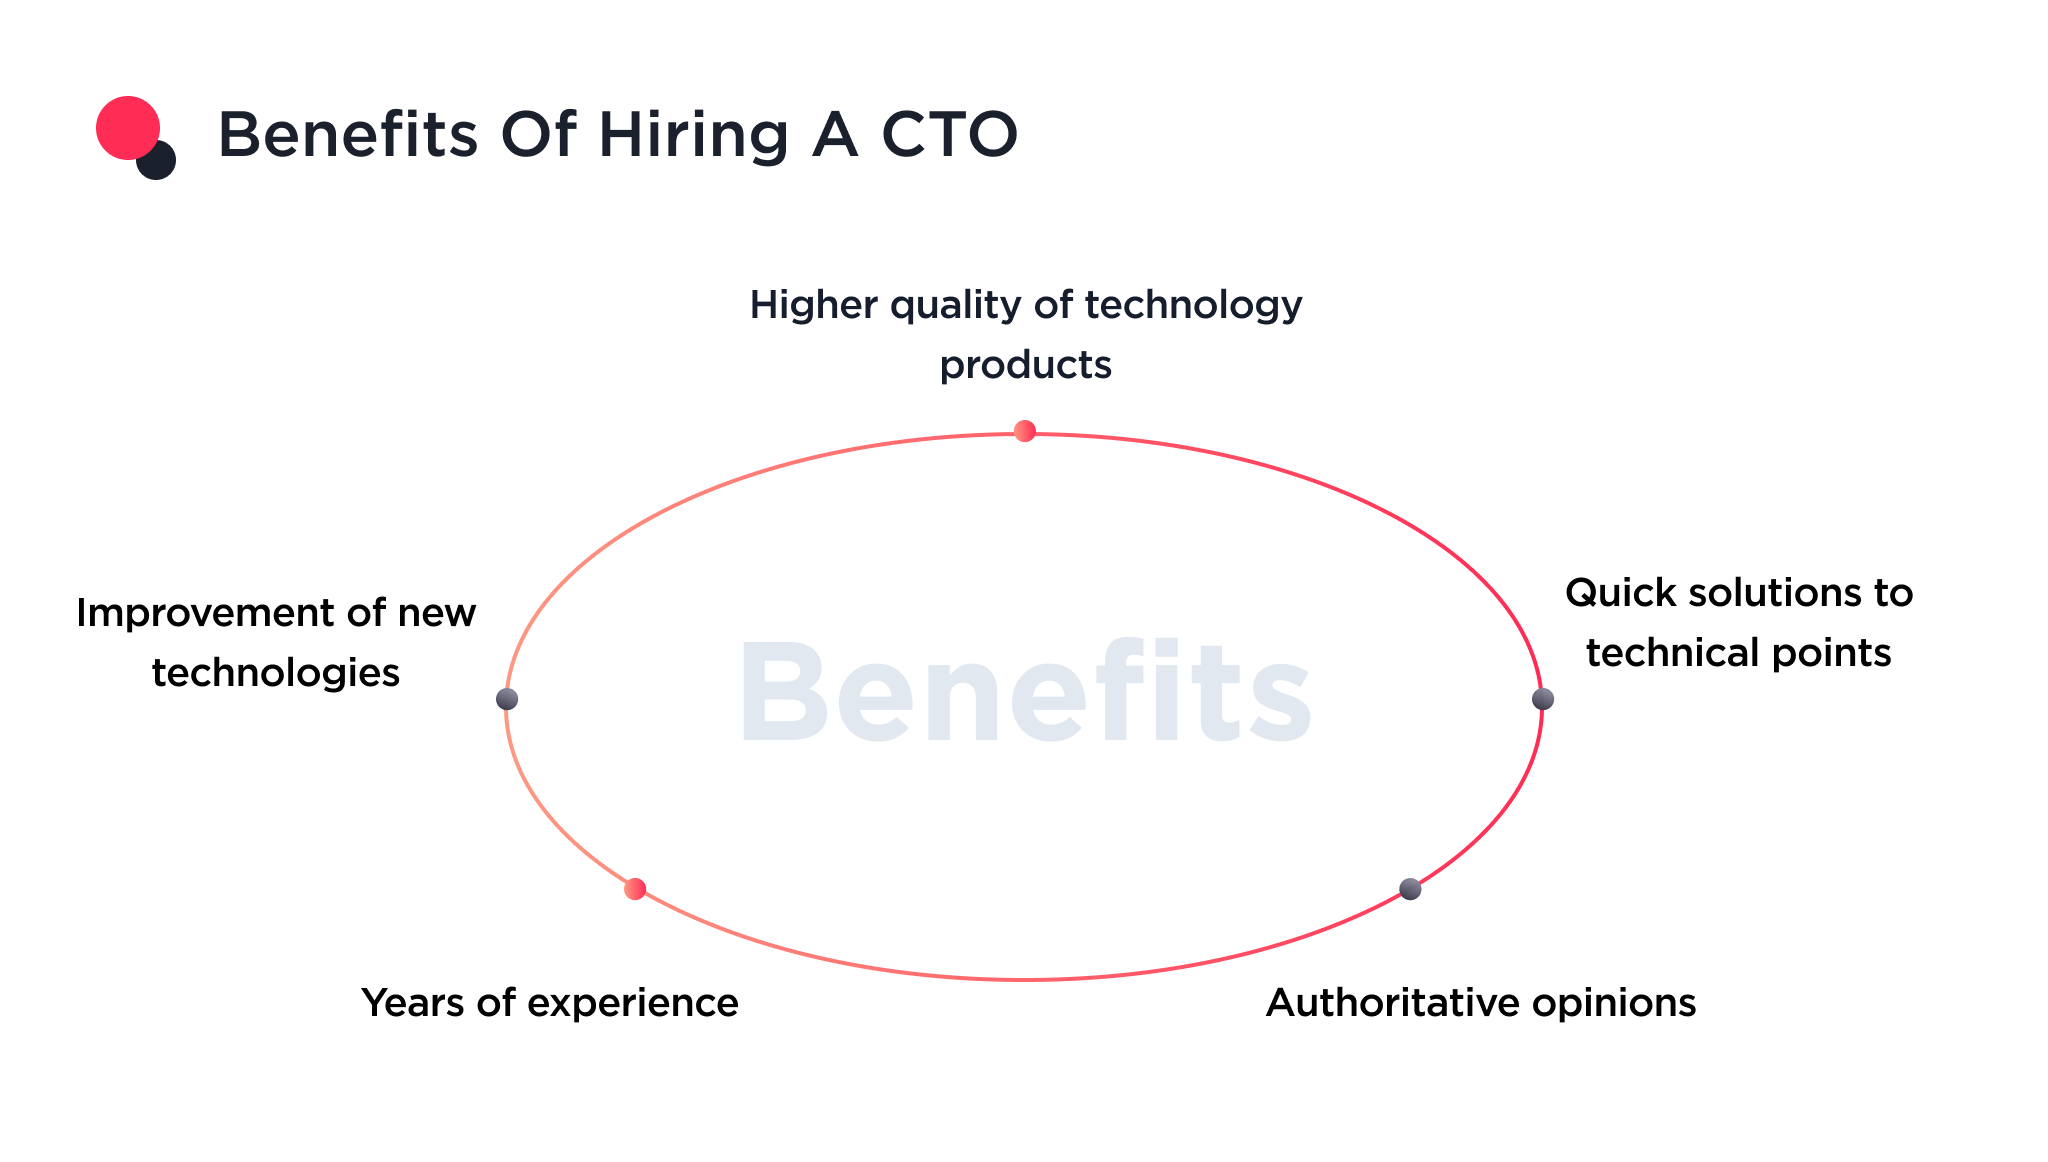 This illustration shows benefits of hiring a CTO